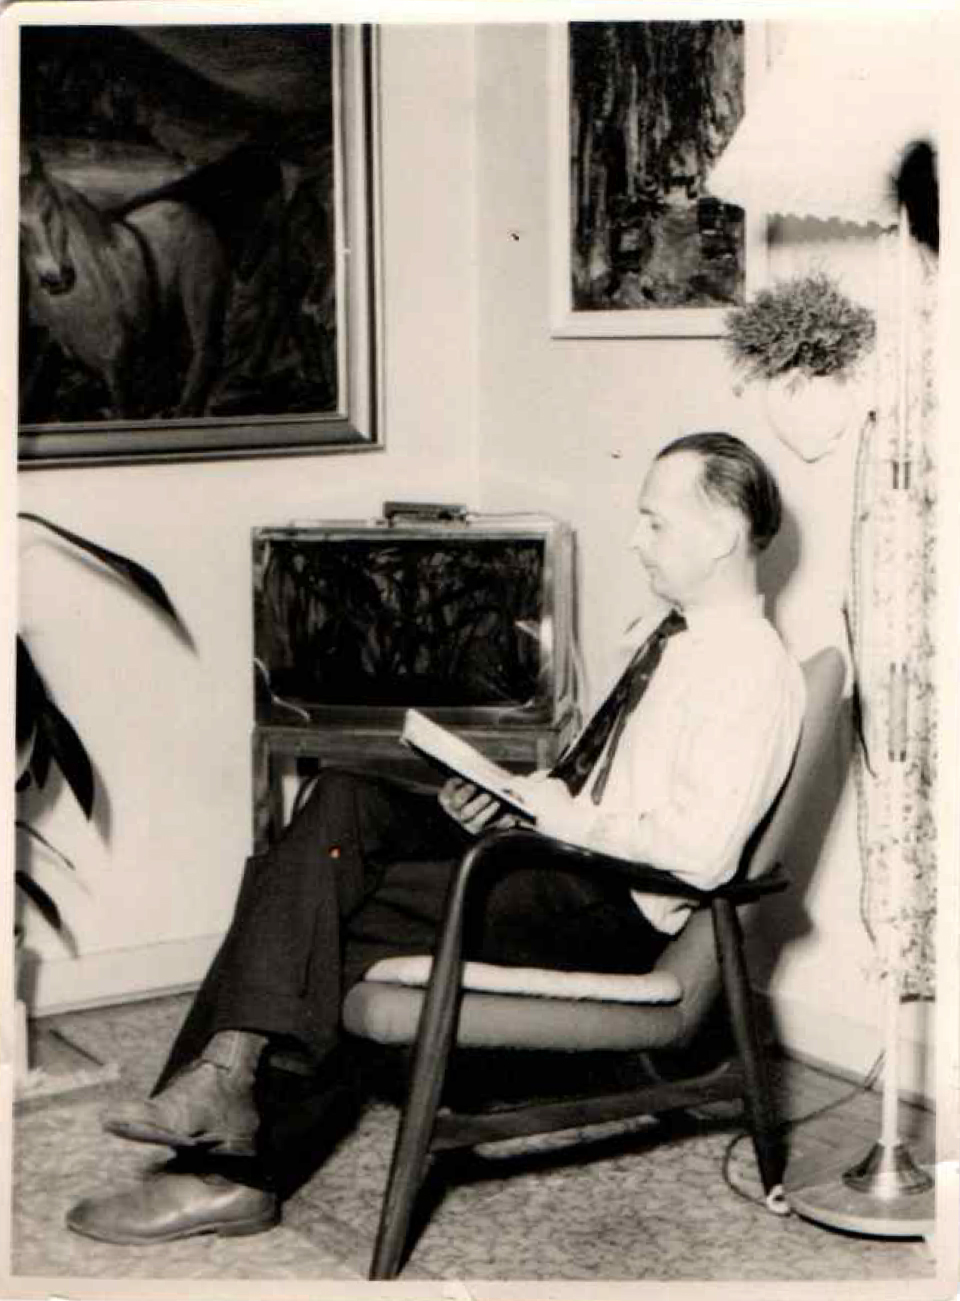 Danish upholsterer Arnold Madsen sitting in an armchair and reading at his home in Copehagen, ca. 1950